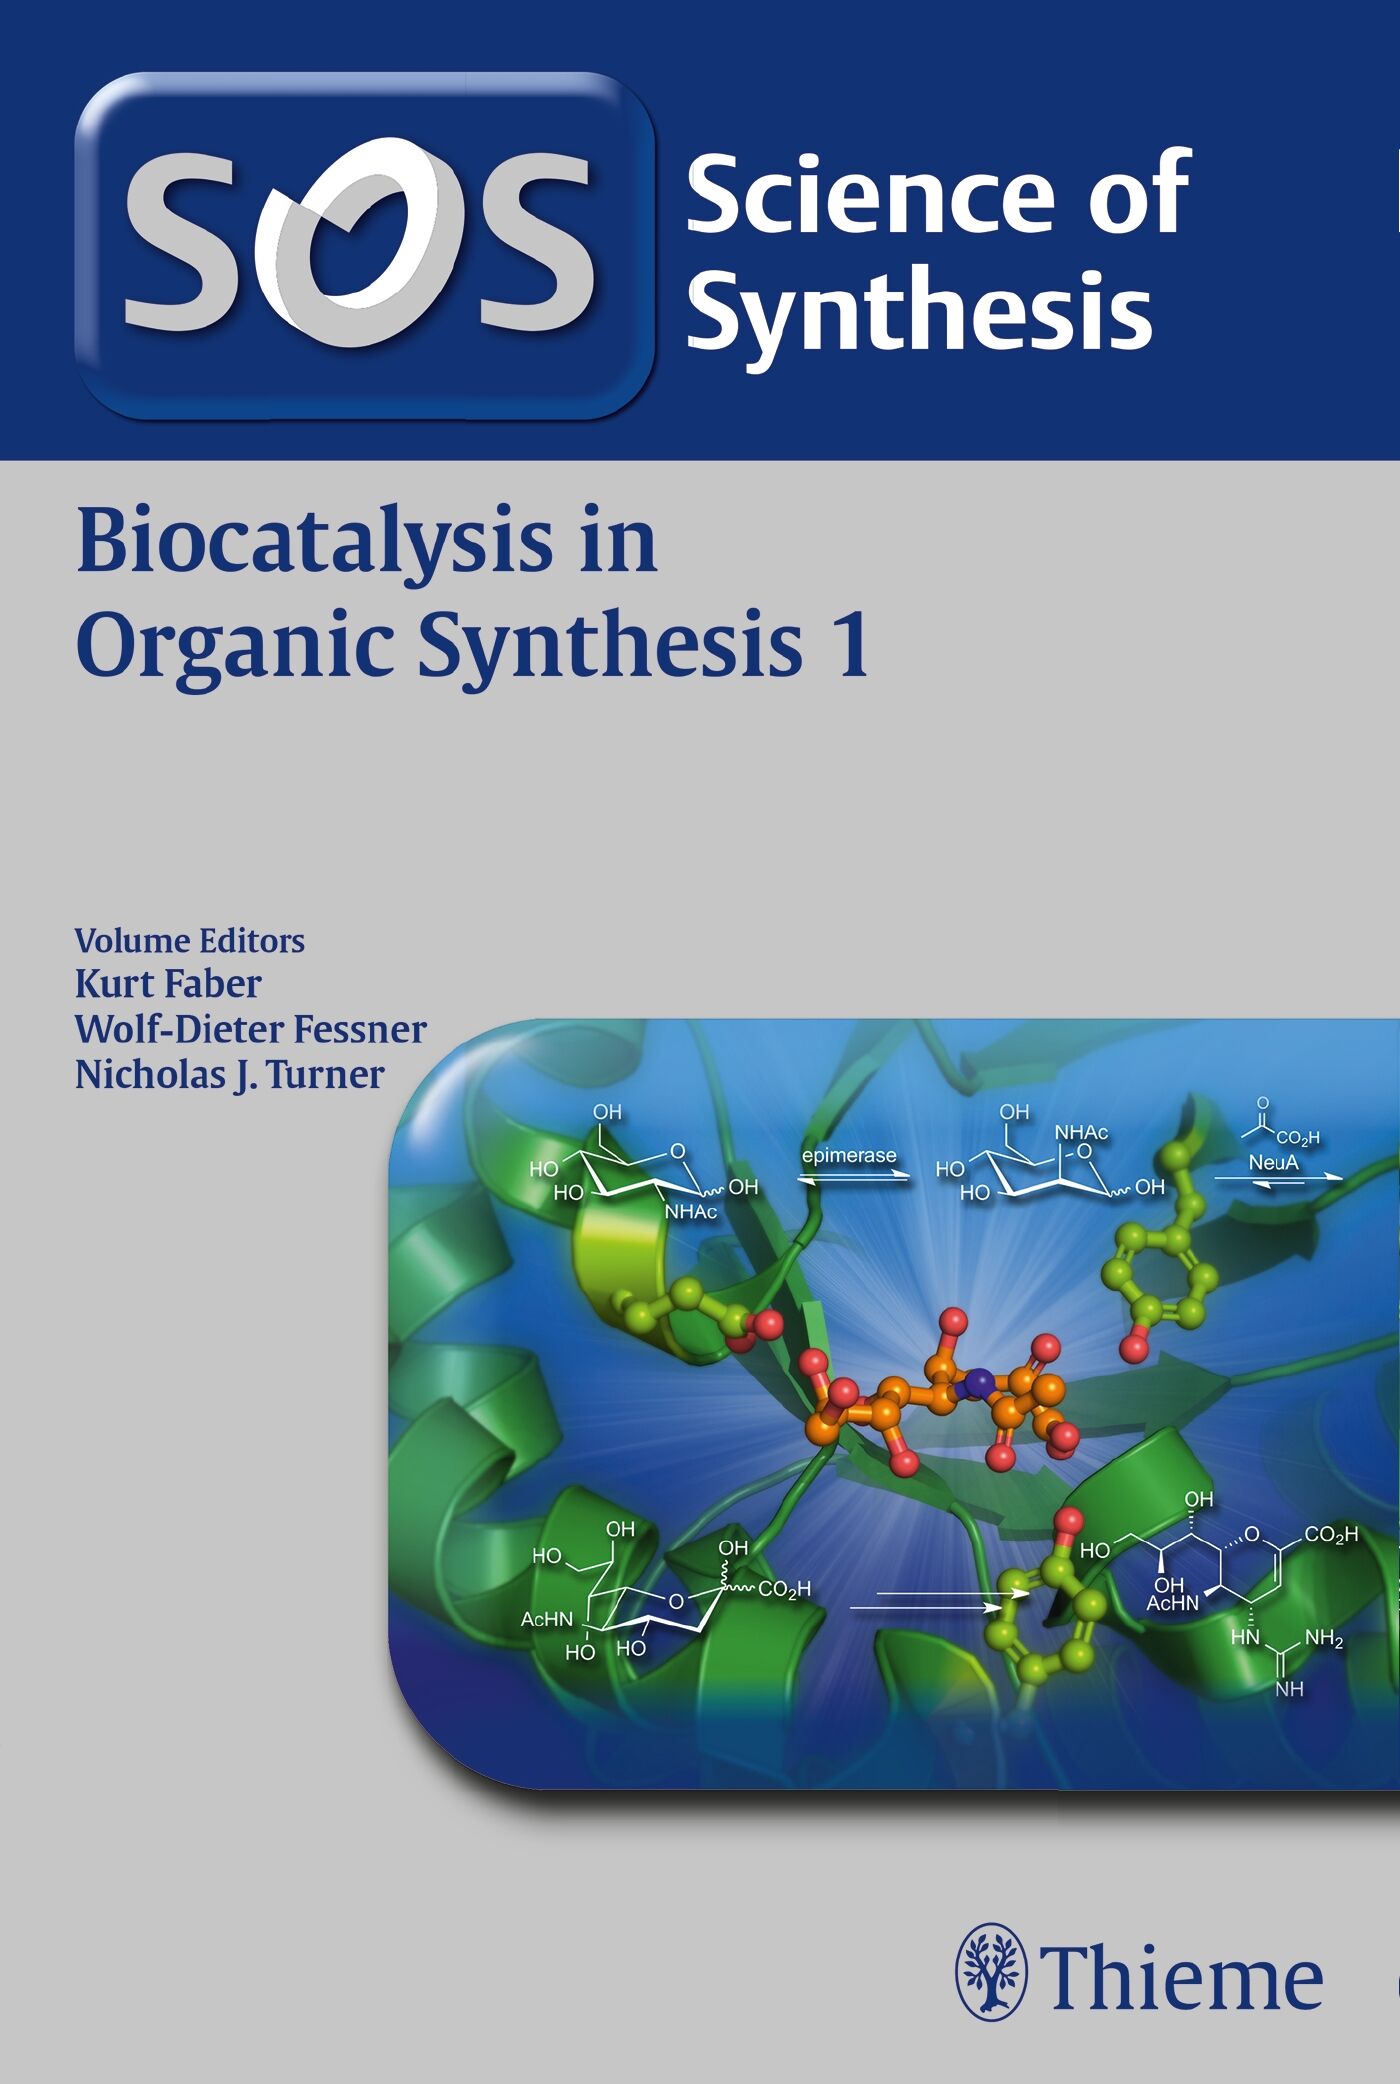 Science of Synthesis: Biocatalysis in Organic Synthesis Vol. 1, 9783131766212